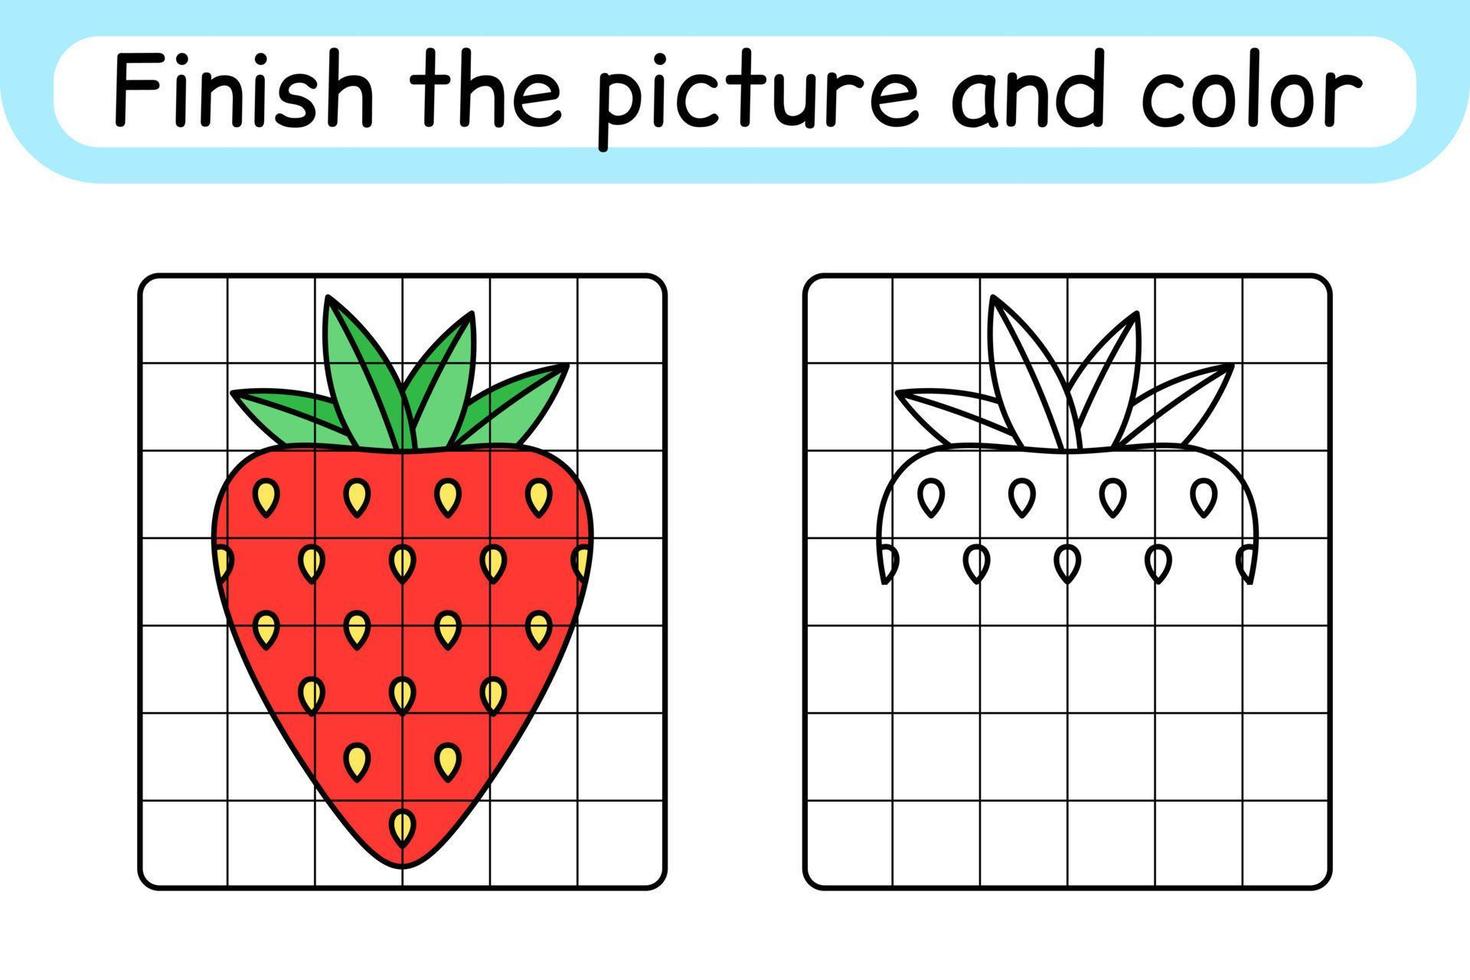 Complete the picture strawberry. Copy the picture and color. Finish the image. Coloring book. Educational drawing exercise game for children vector